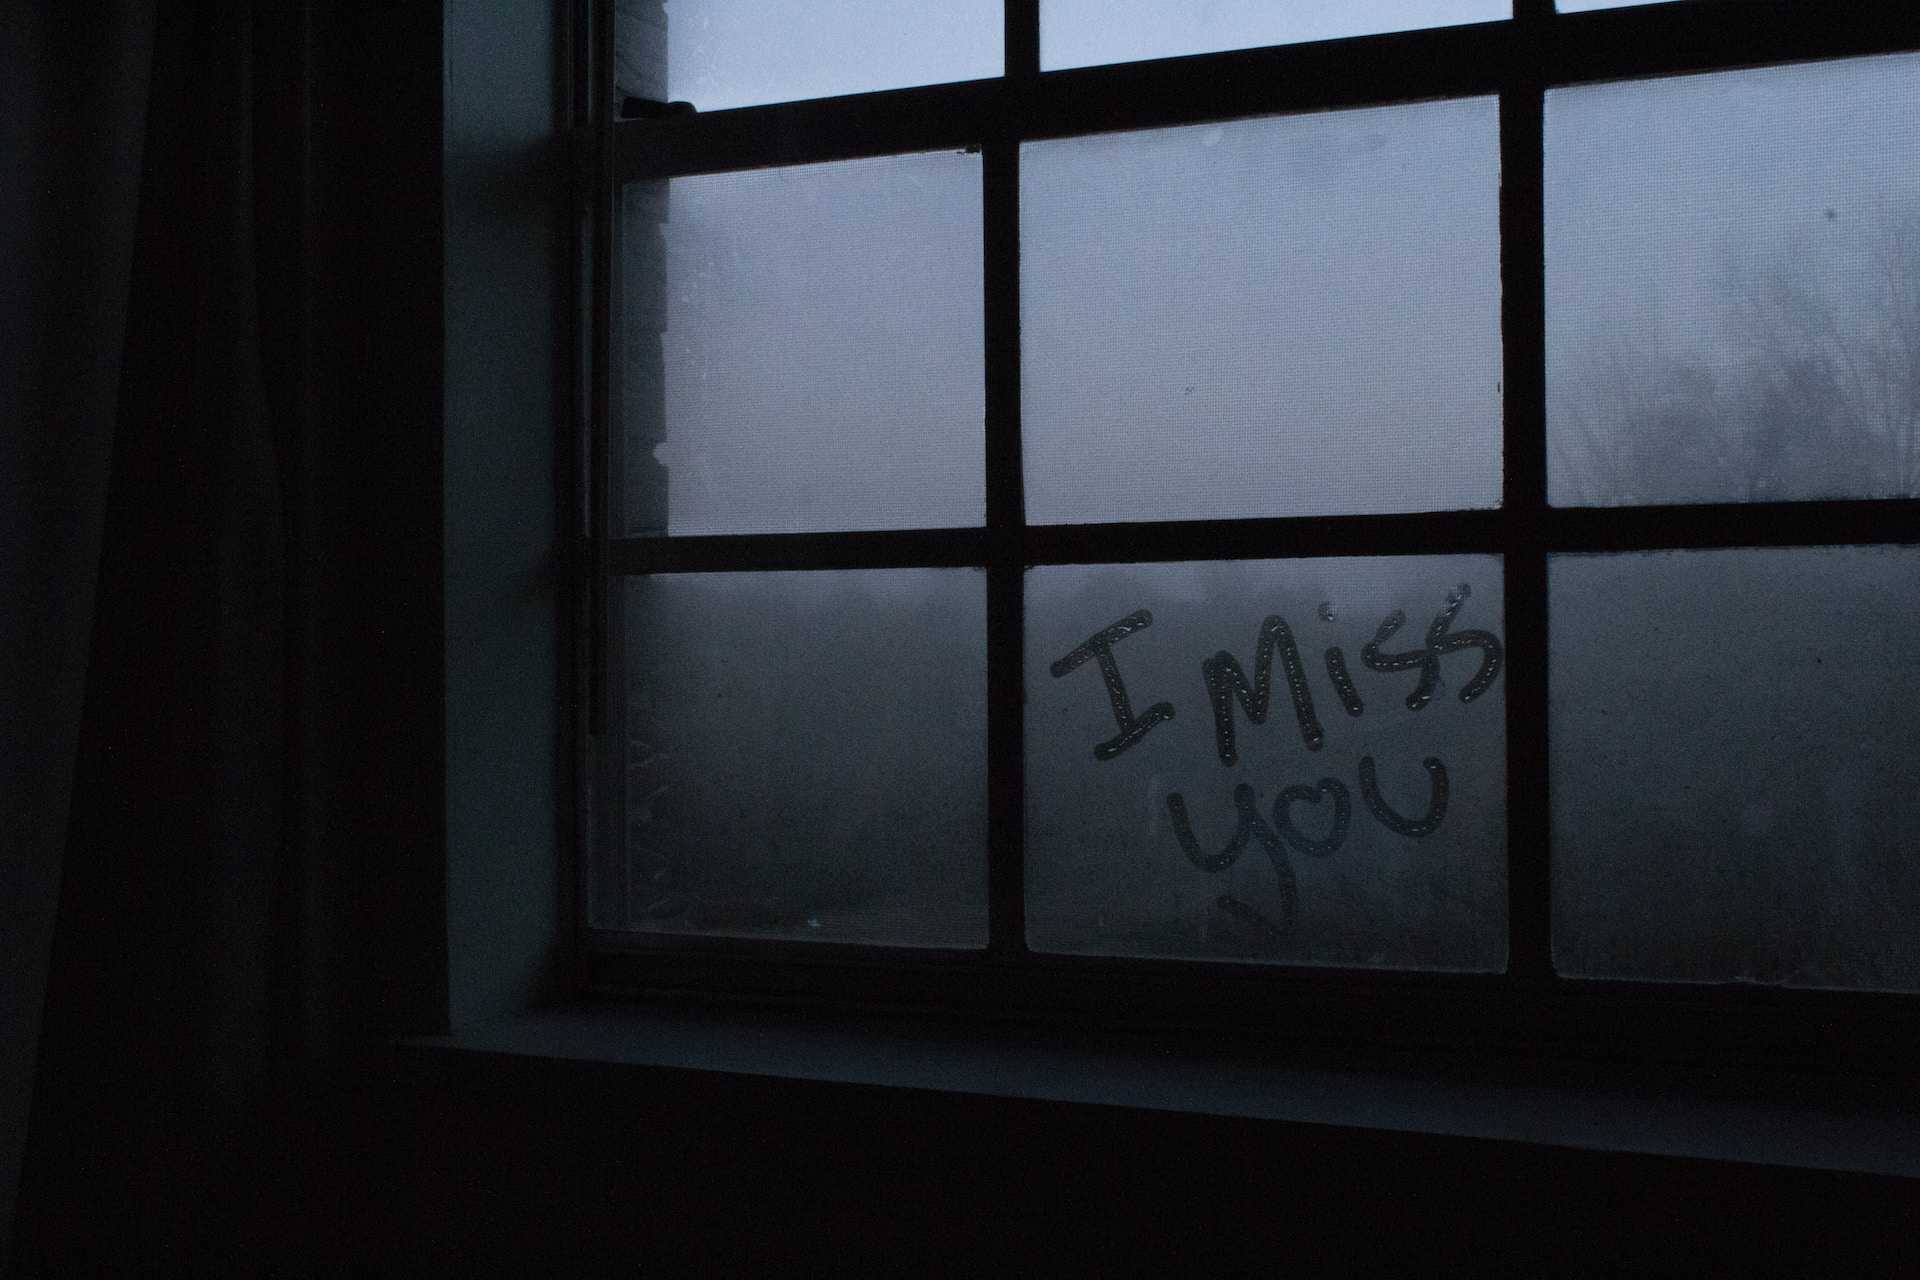 i miss you wrote in a wet glass window in a dark room